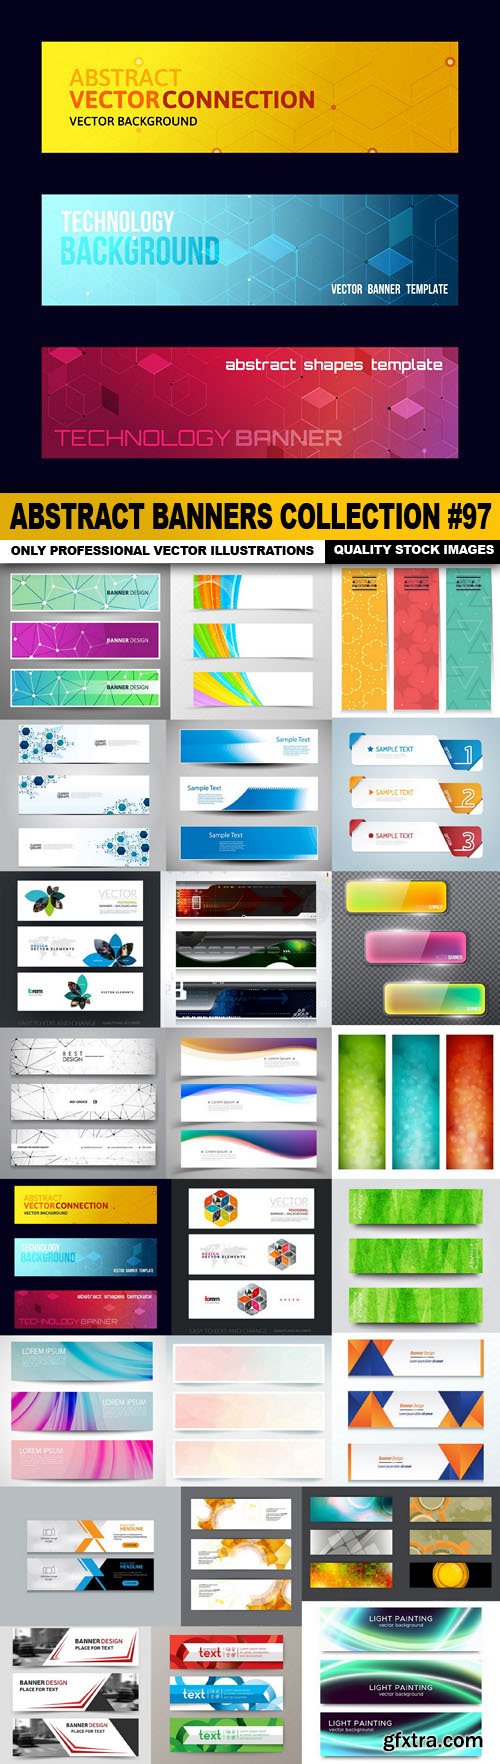 Abstract Banners Collection #97 - 25 Vectors